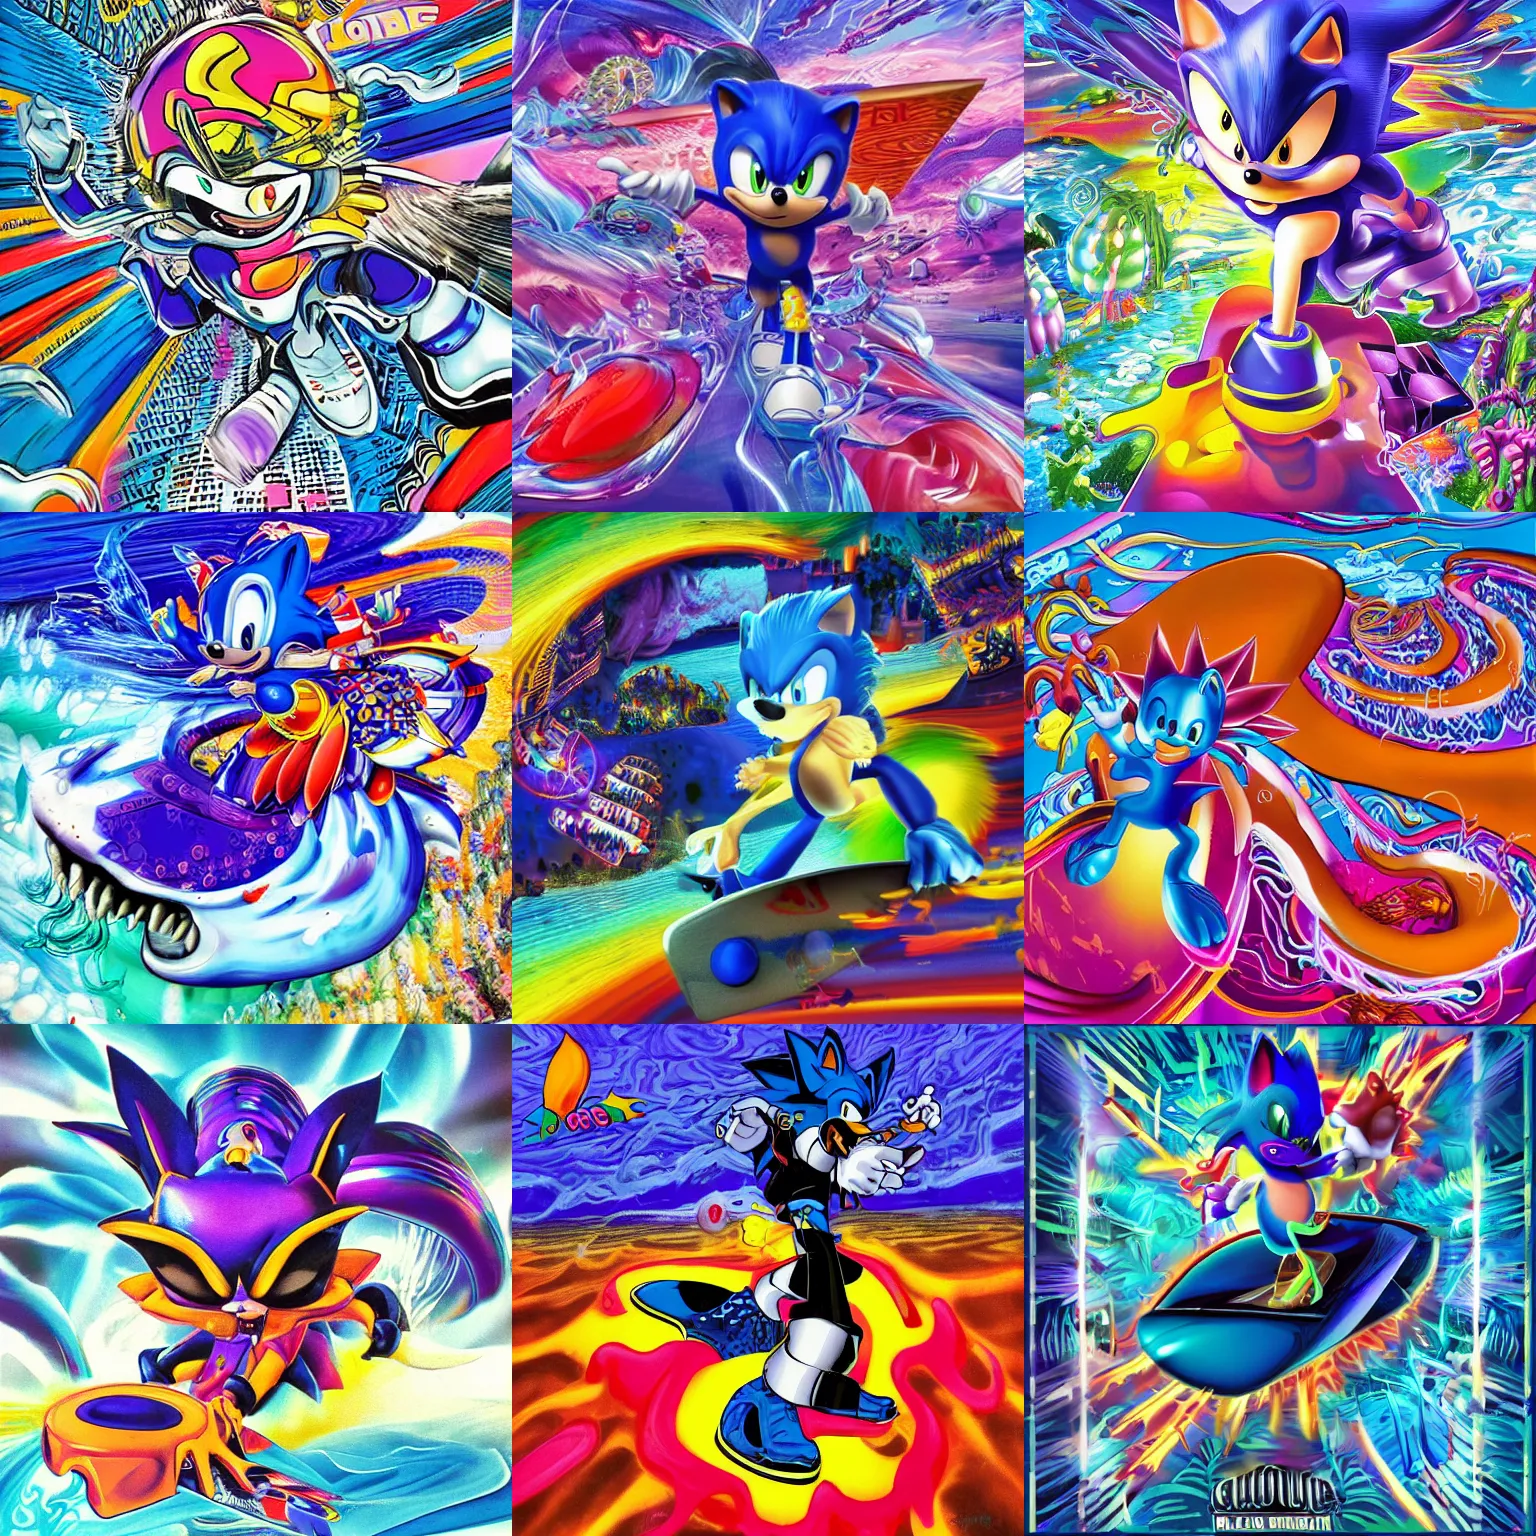 Image similar to surreal, sharp, detailed professional, high quality airbrush art MGMT album cover of a liquid dissolving LSD DMT blue sonic the hedgehog surfing through cyberspace, purple checkerboard background, 1990s 1992 Sega Genesis video game album cover